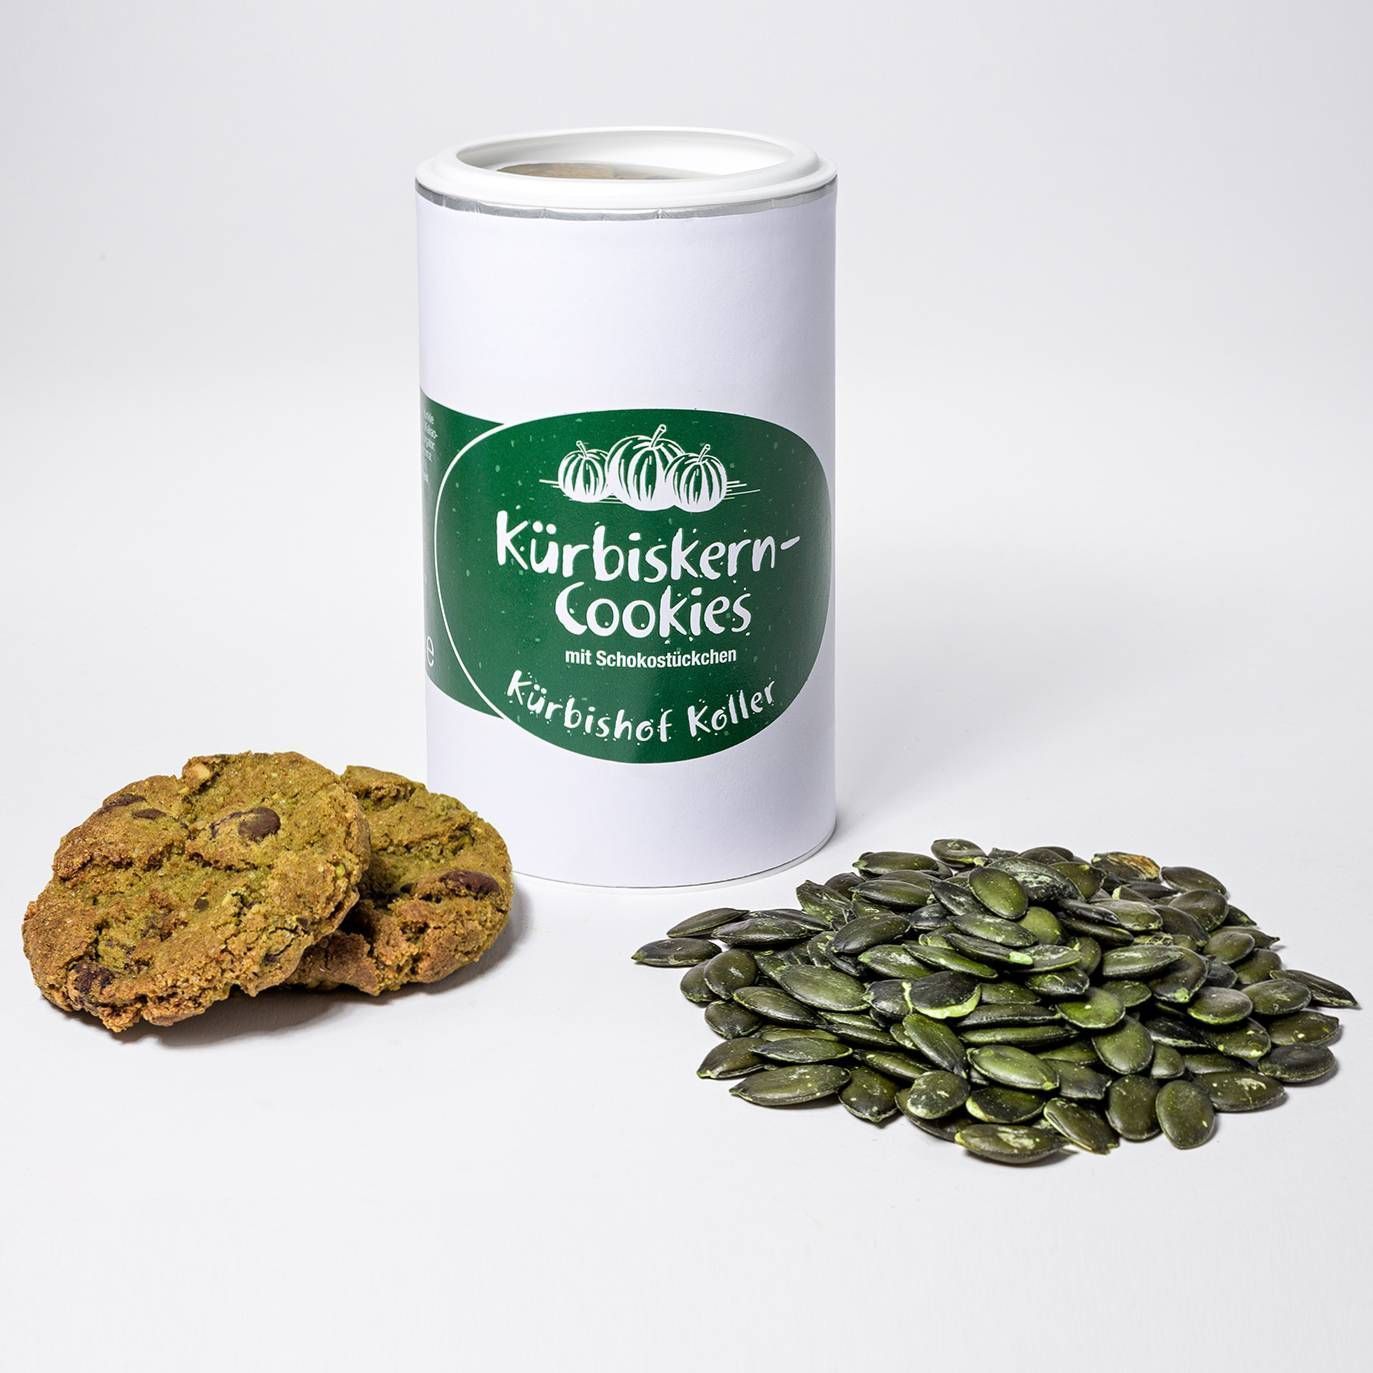 Pumpkin Seed Cookies with Chocolate Chips in Peru